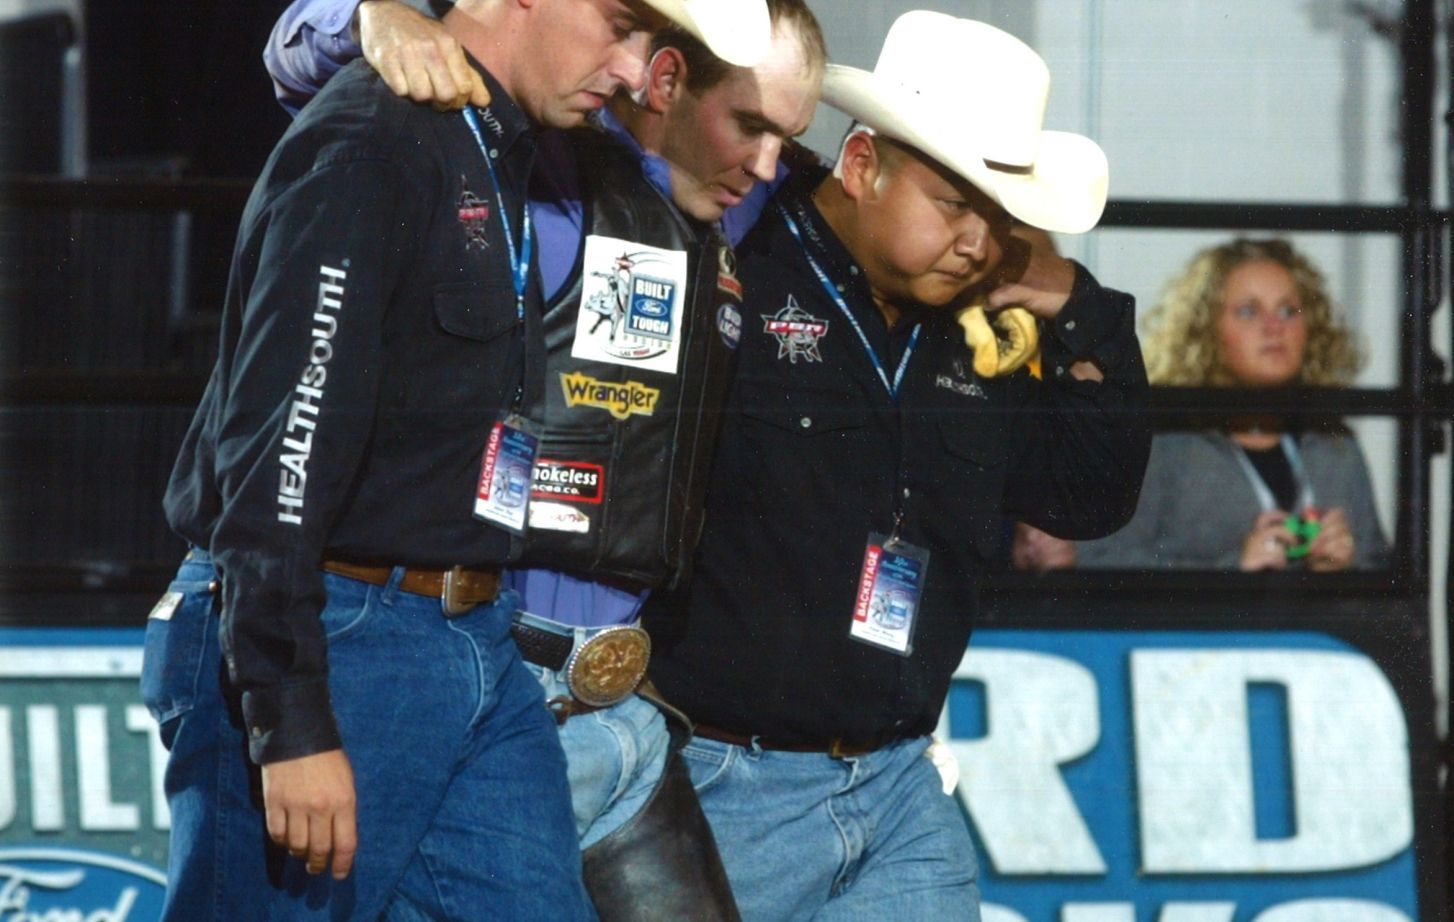 Peter Wang (far right) helps an athlete at a Professional Bull Riders event.